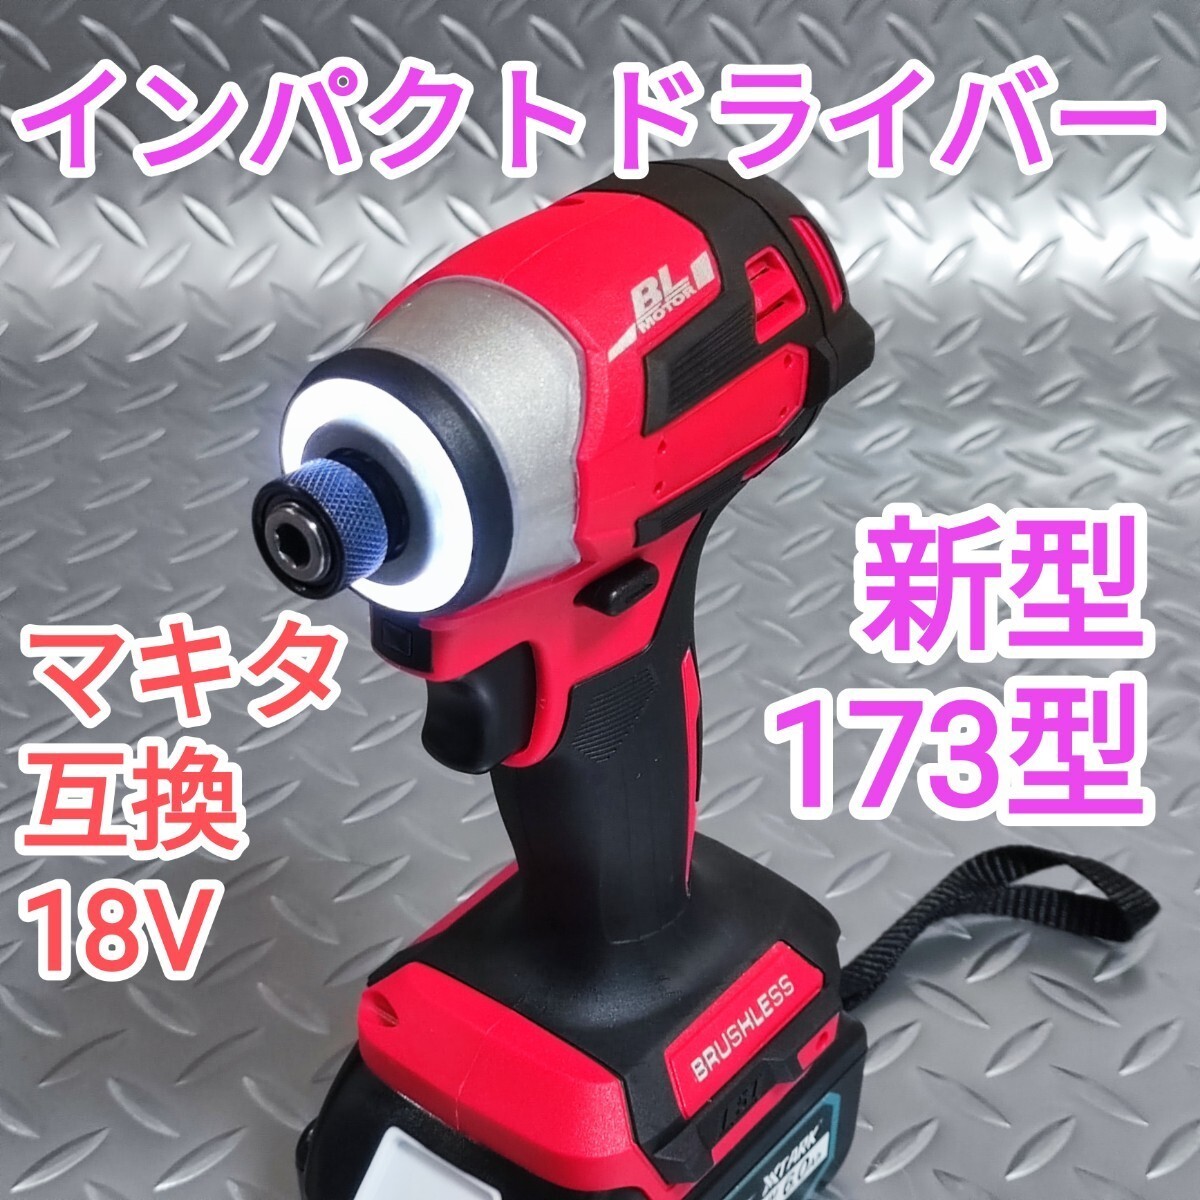 [ red color ] impact driver Makita interchangeable 18V new model 173 type height torque 